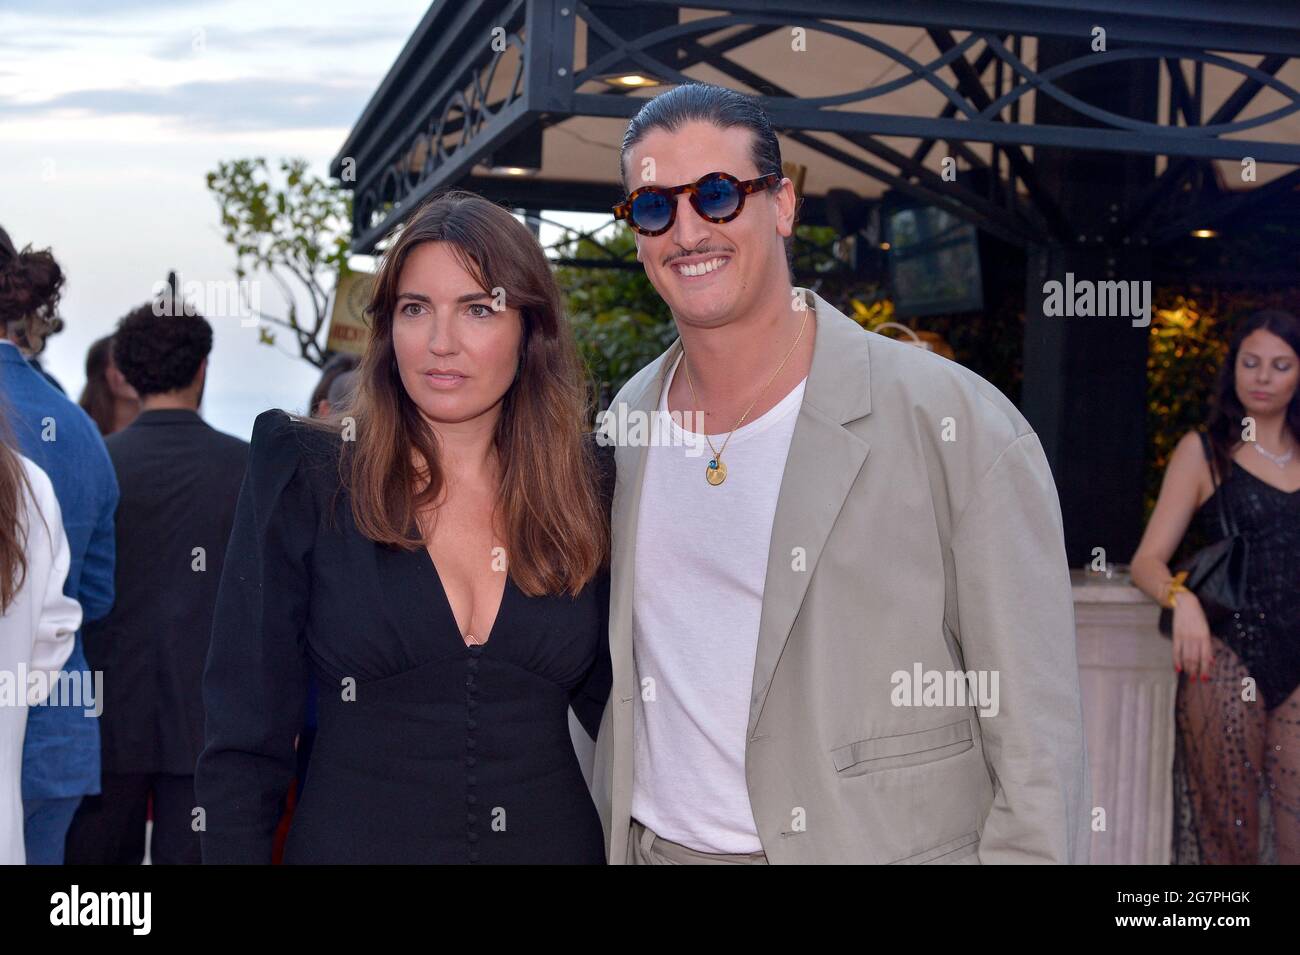 Cannes, France. 15th July, 2021. Lisa Chavy, Richard Mazigh at the Livy x Forbes party ahead of the 74th Cannes Film Festival in Cannes, France on July 15 2021. Photo by Julien Reynaud/APS-Medias/ABACAPRESS.COM Credit: Abaca Press/Alamy Live News Stock Photo